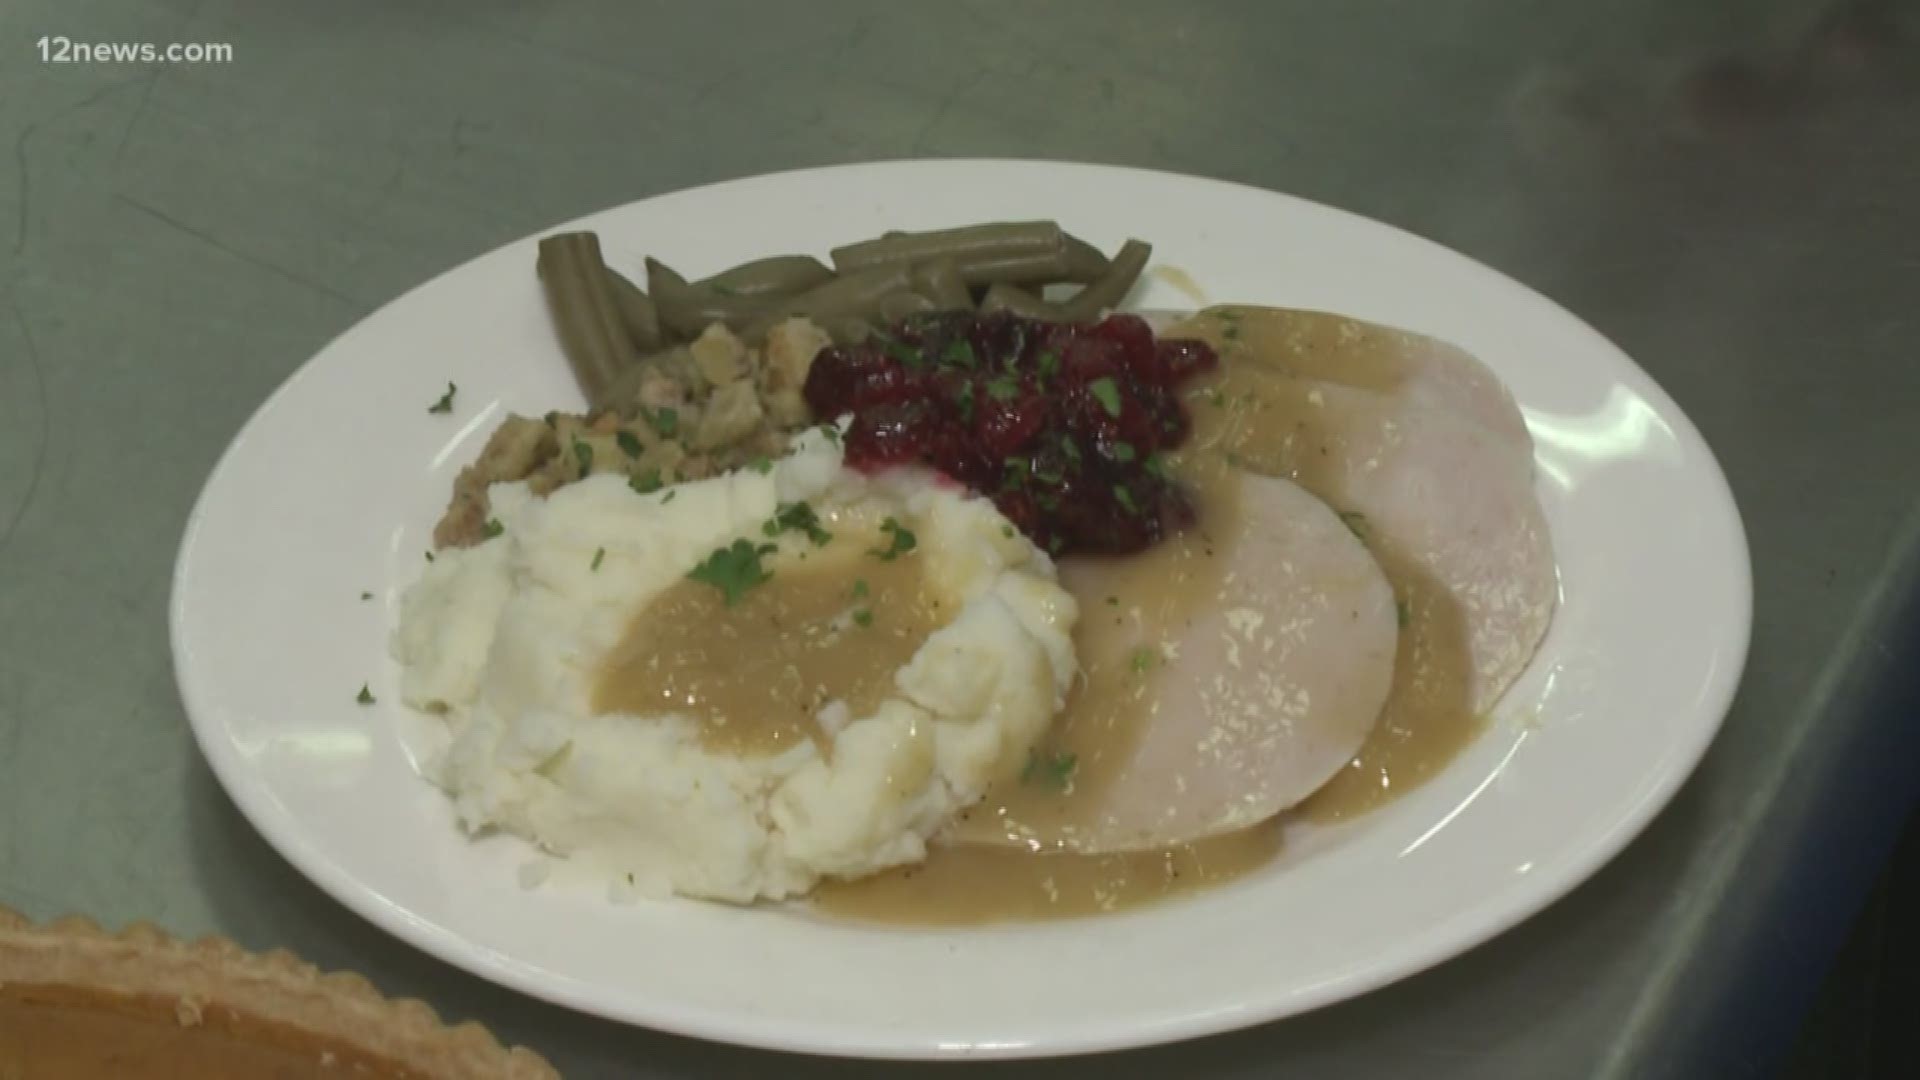 A local chef down on his luck got some help from St. Vincent De Paul when he needed it most. Now, he cooks for others in need and shares his secrets for amazing stuffing and cranberry sauce.